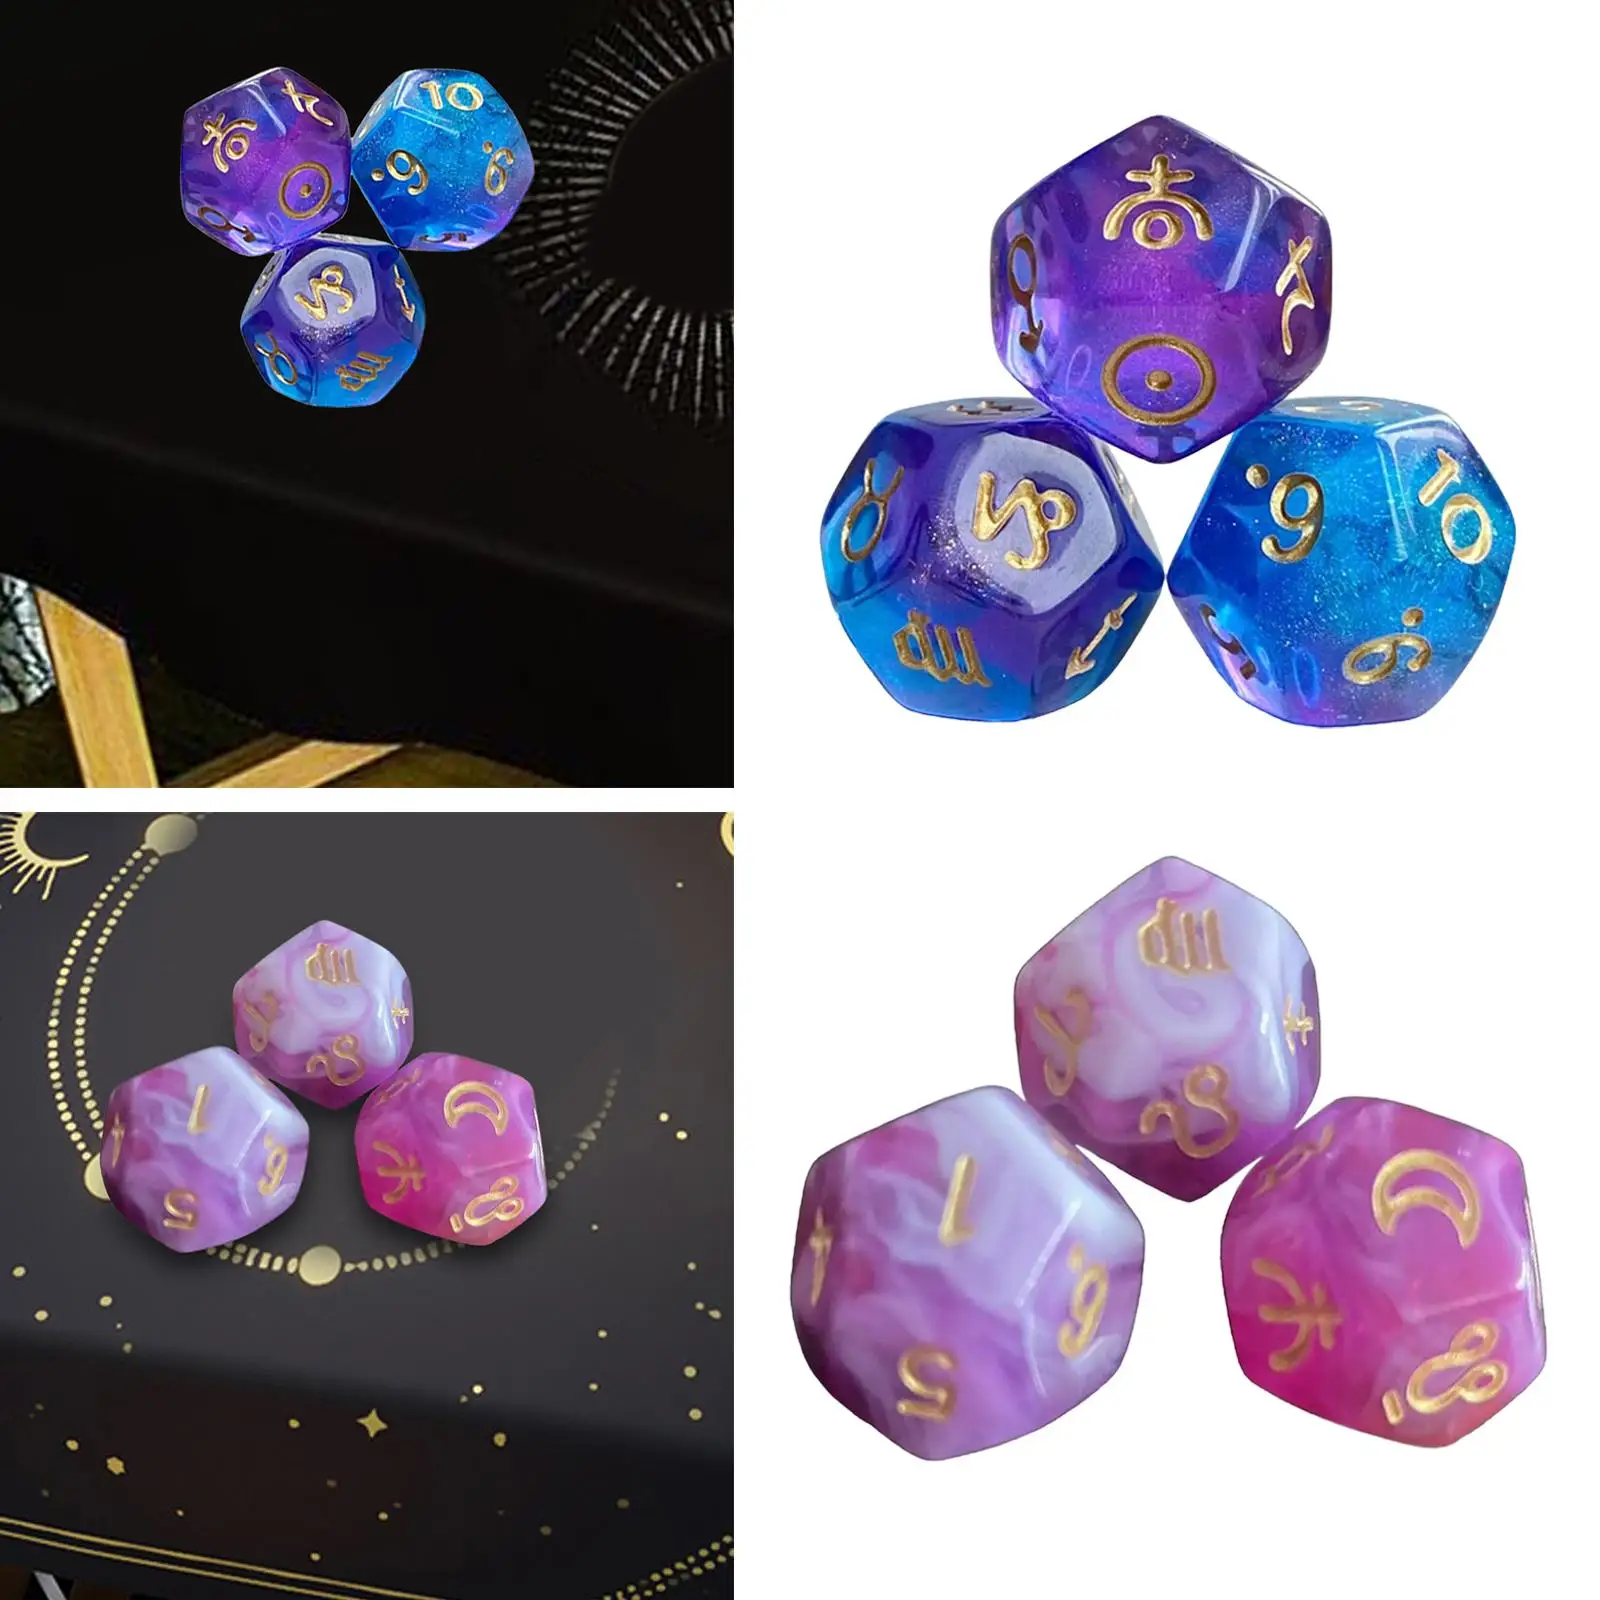 3 Pieces Astrology Signs Dice Exquisite Crafts Multi Sided Dices Collection Acrylic D12 Dice for Party Toy Role Playing Game